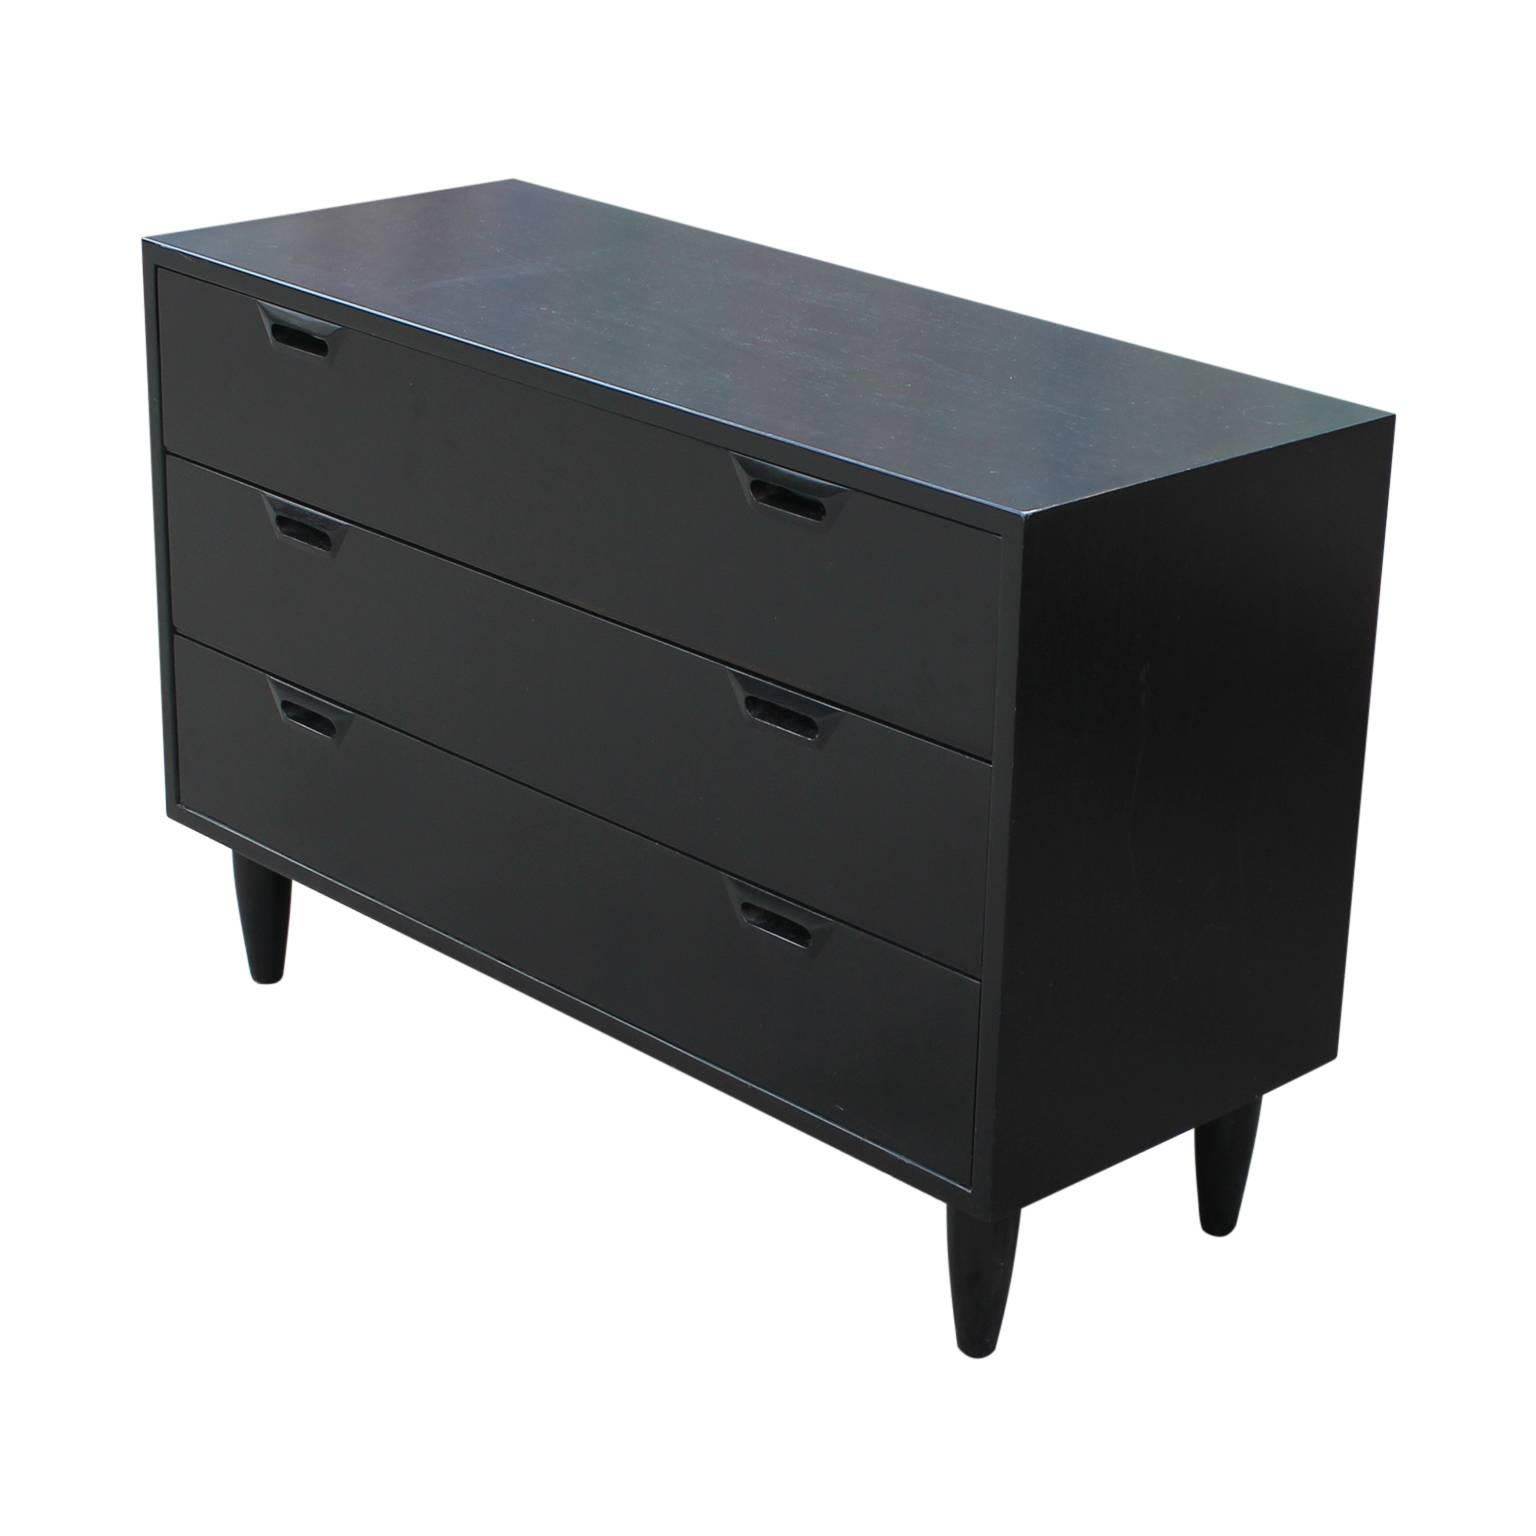 Pair of Mid-Century Modern black chests of drawers designed by Sven Ellekaer for Albert Hansen as a part of their 